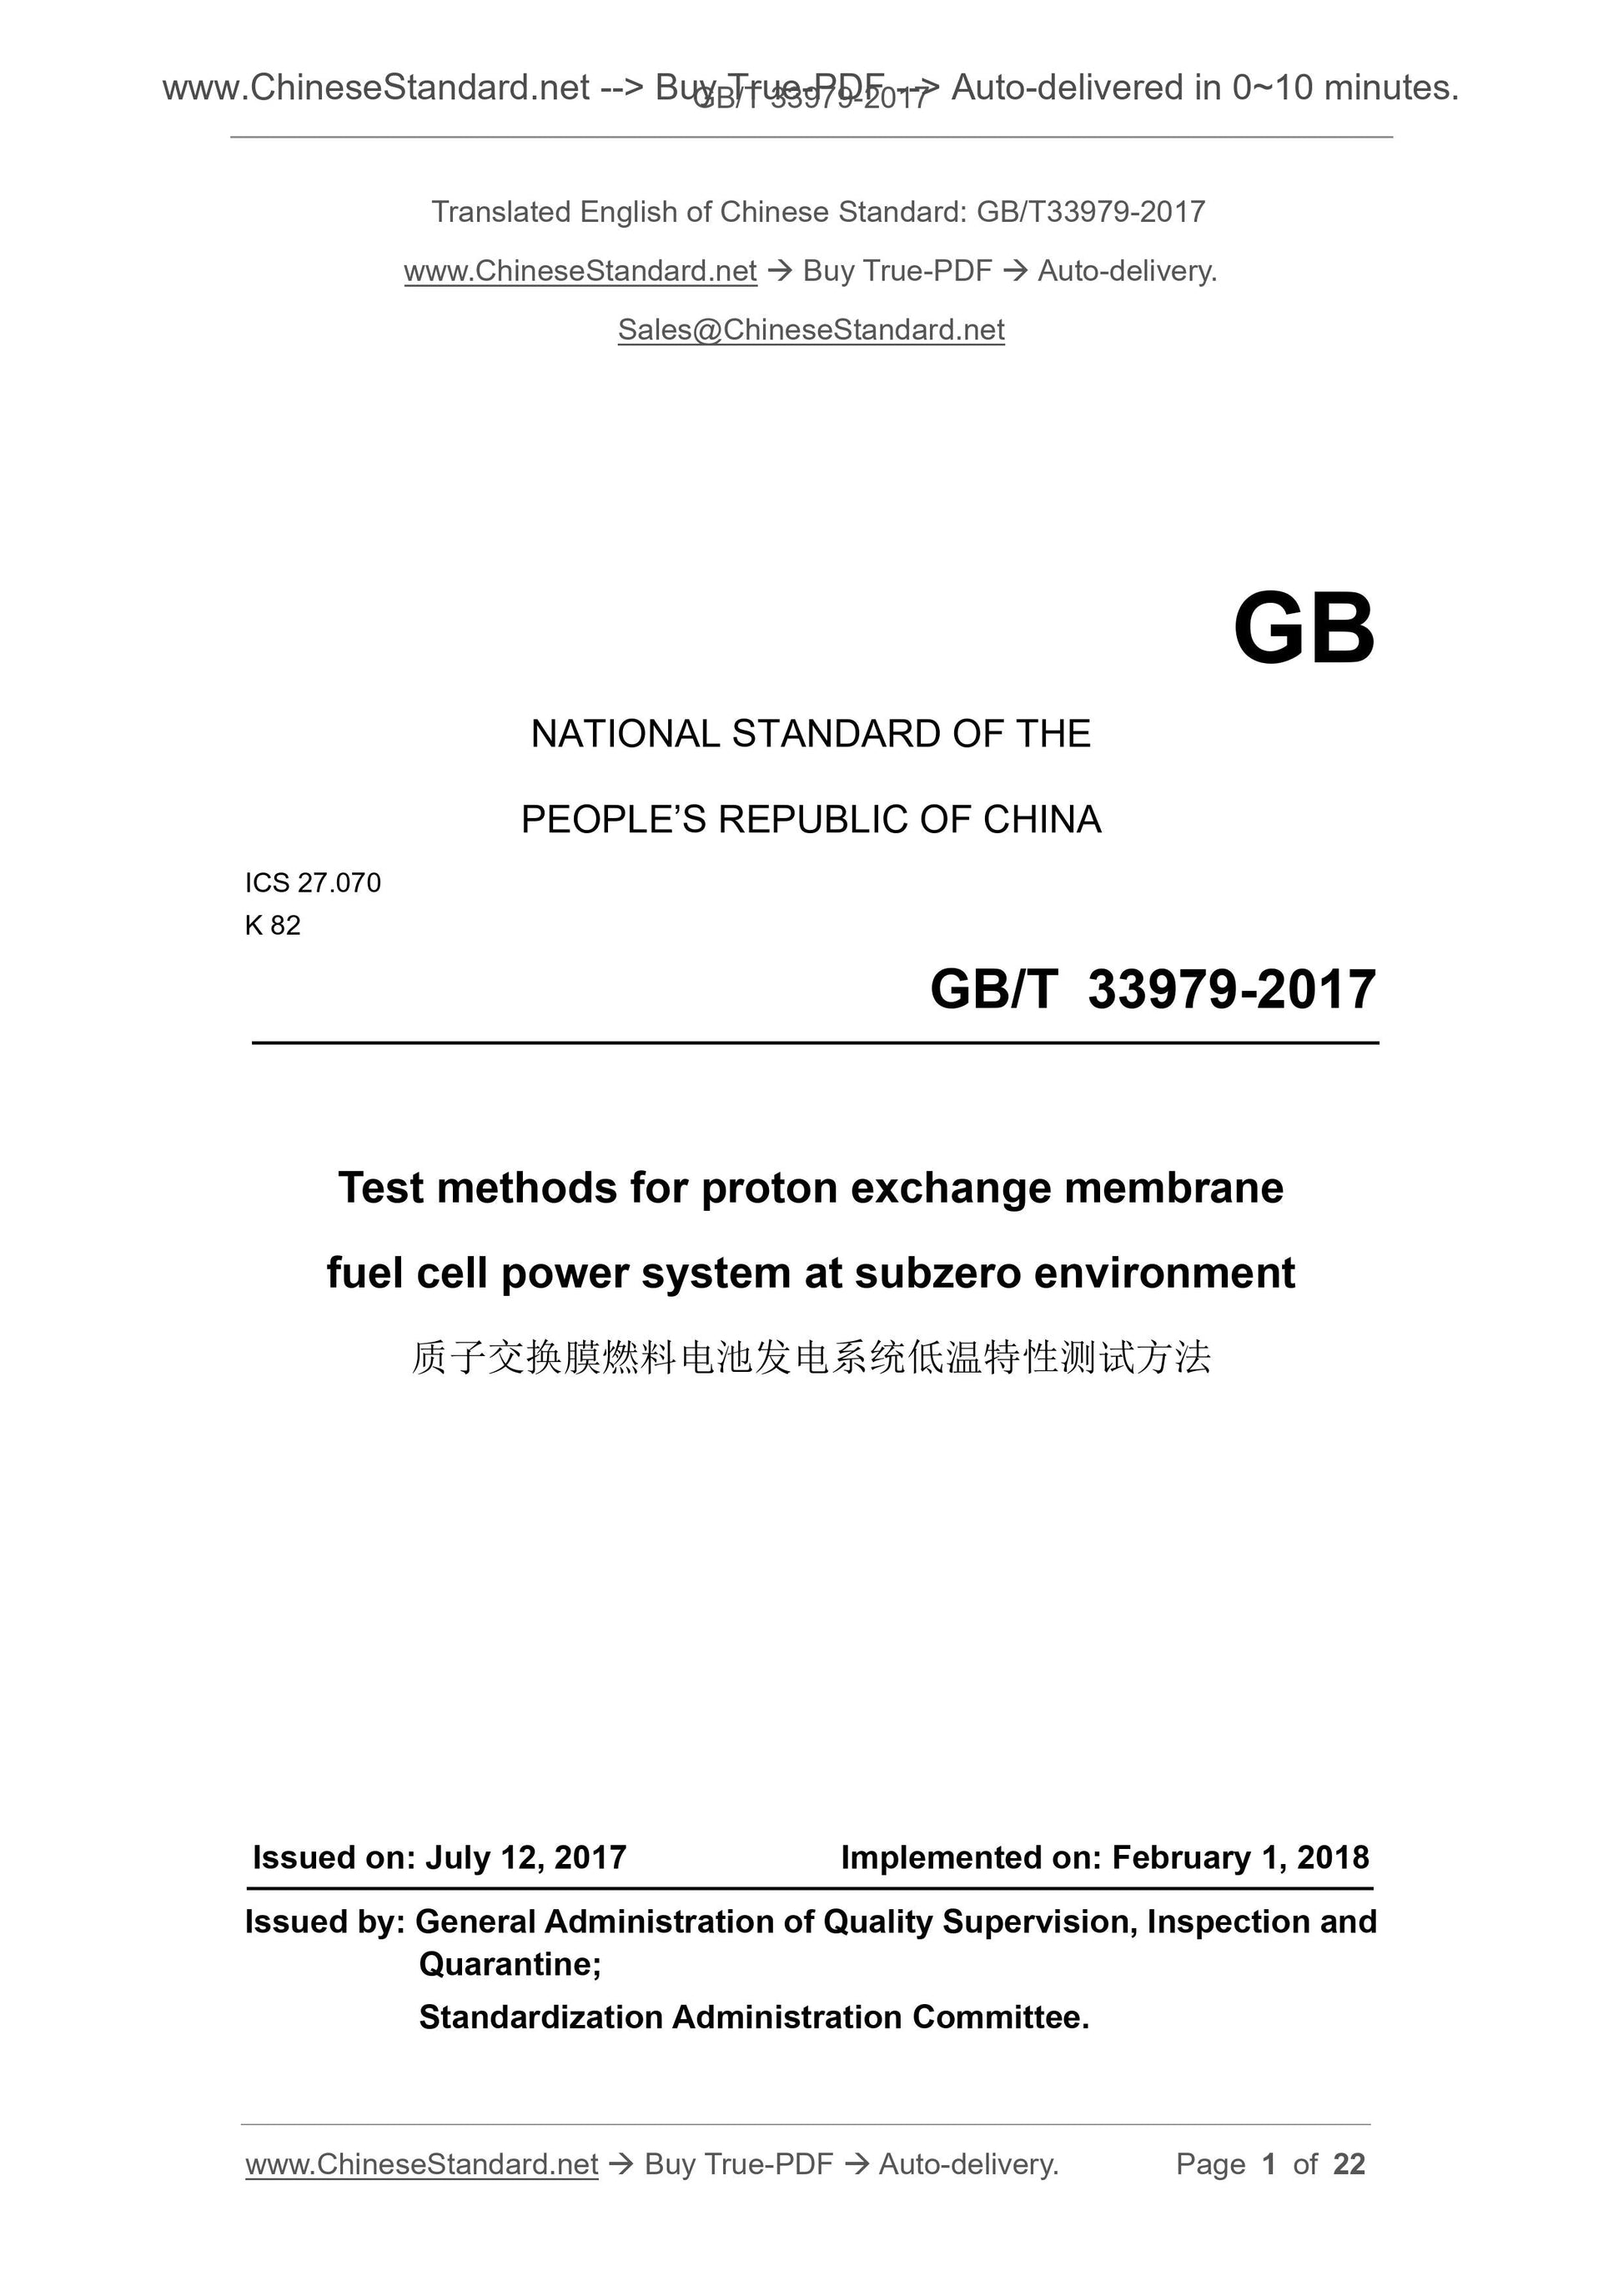 GB/T 33979-2017 Page 1